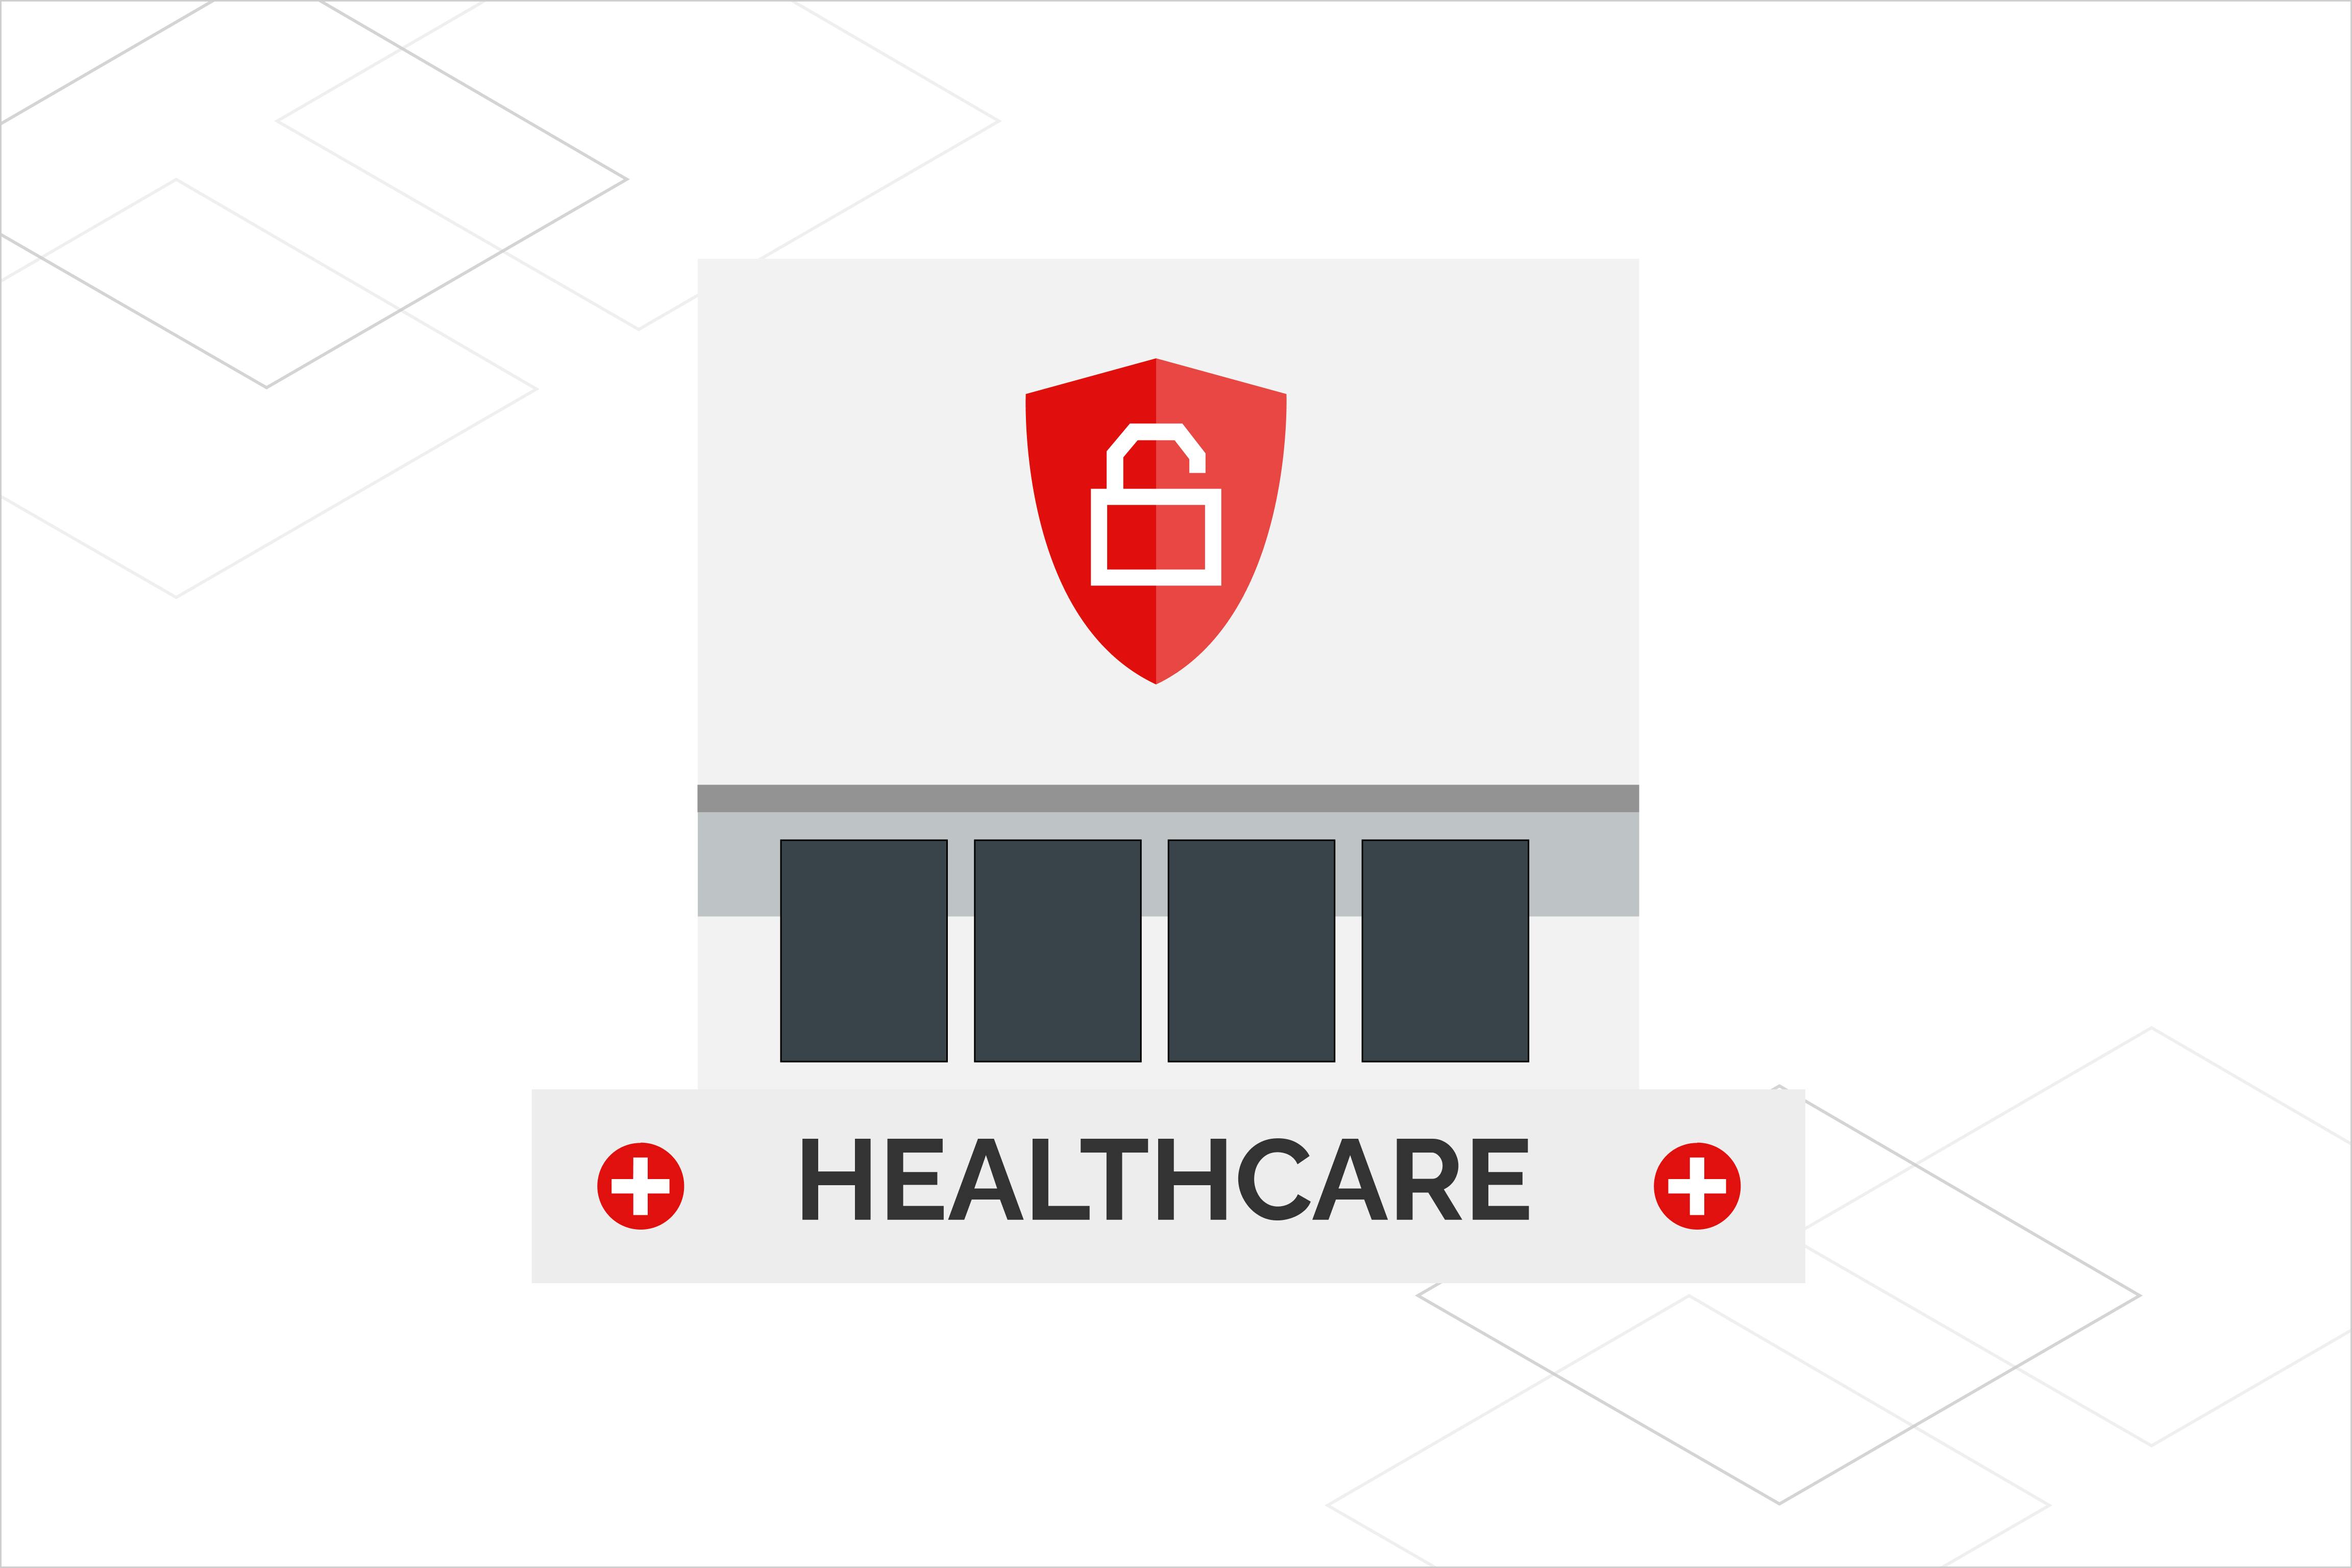 Healthcare providers susceptible to ransomware